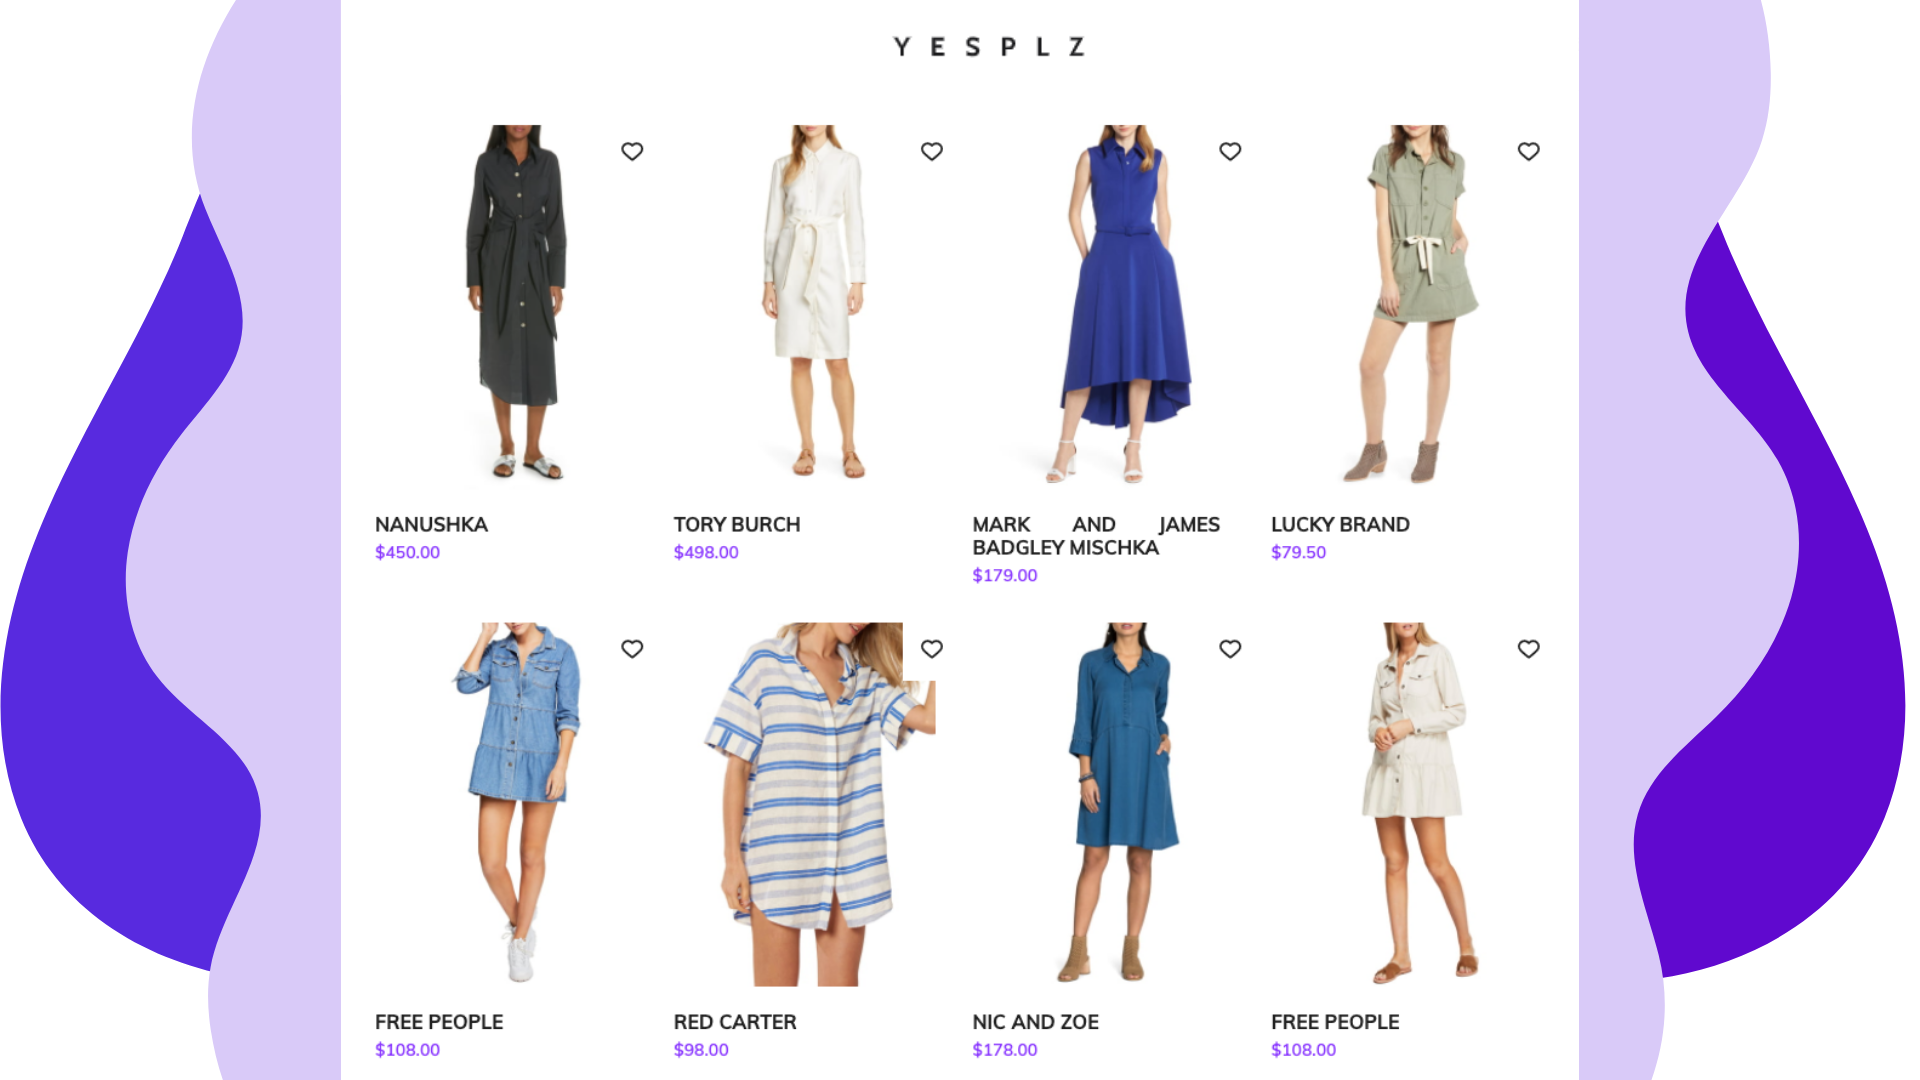 Image tagging for a shirtdress